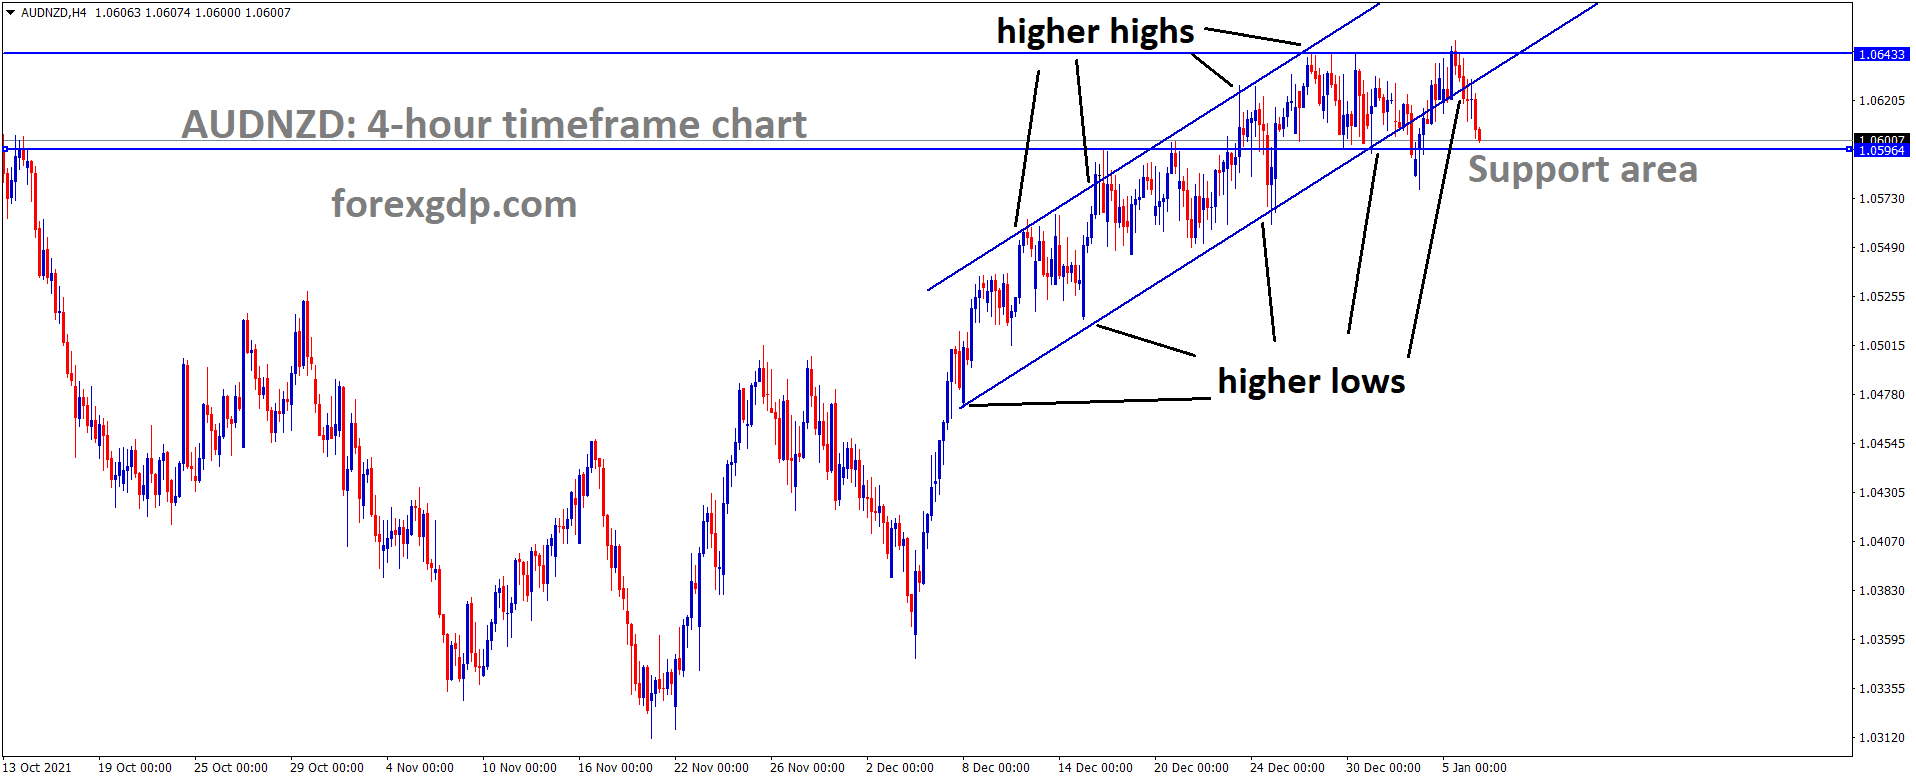 AUDNZD is moving in an Ascending channel and the market has reached the horizontal support area of the Box Pattern.